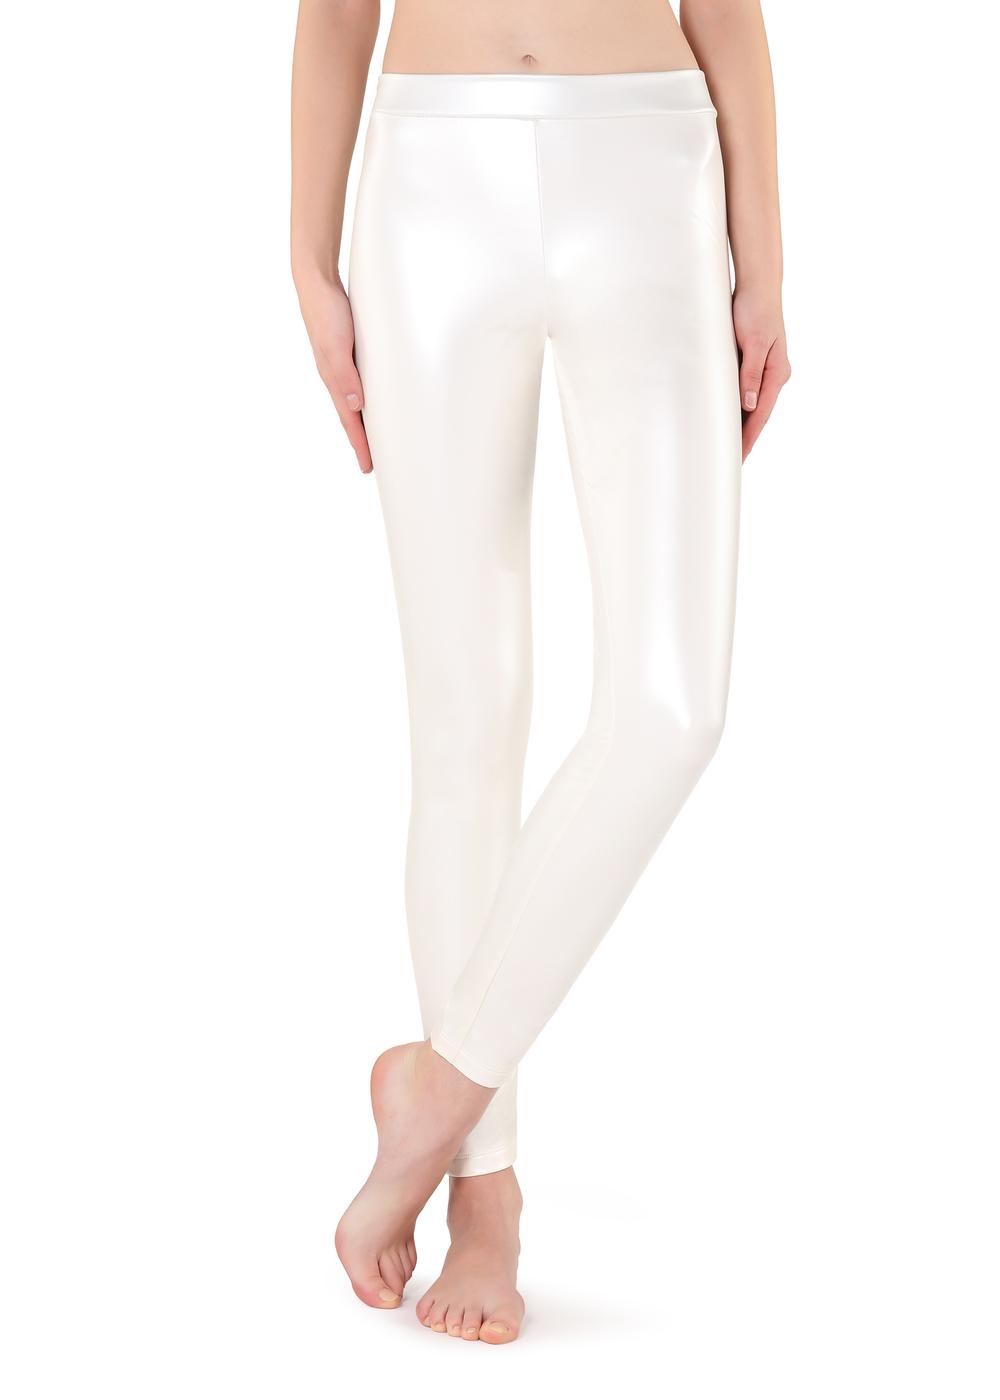 Thermal Leather Leggings Calzedonia New